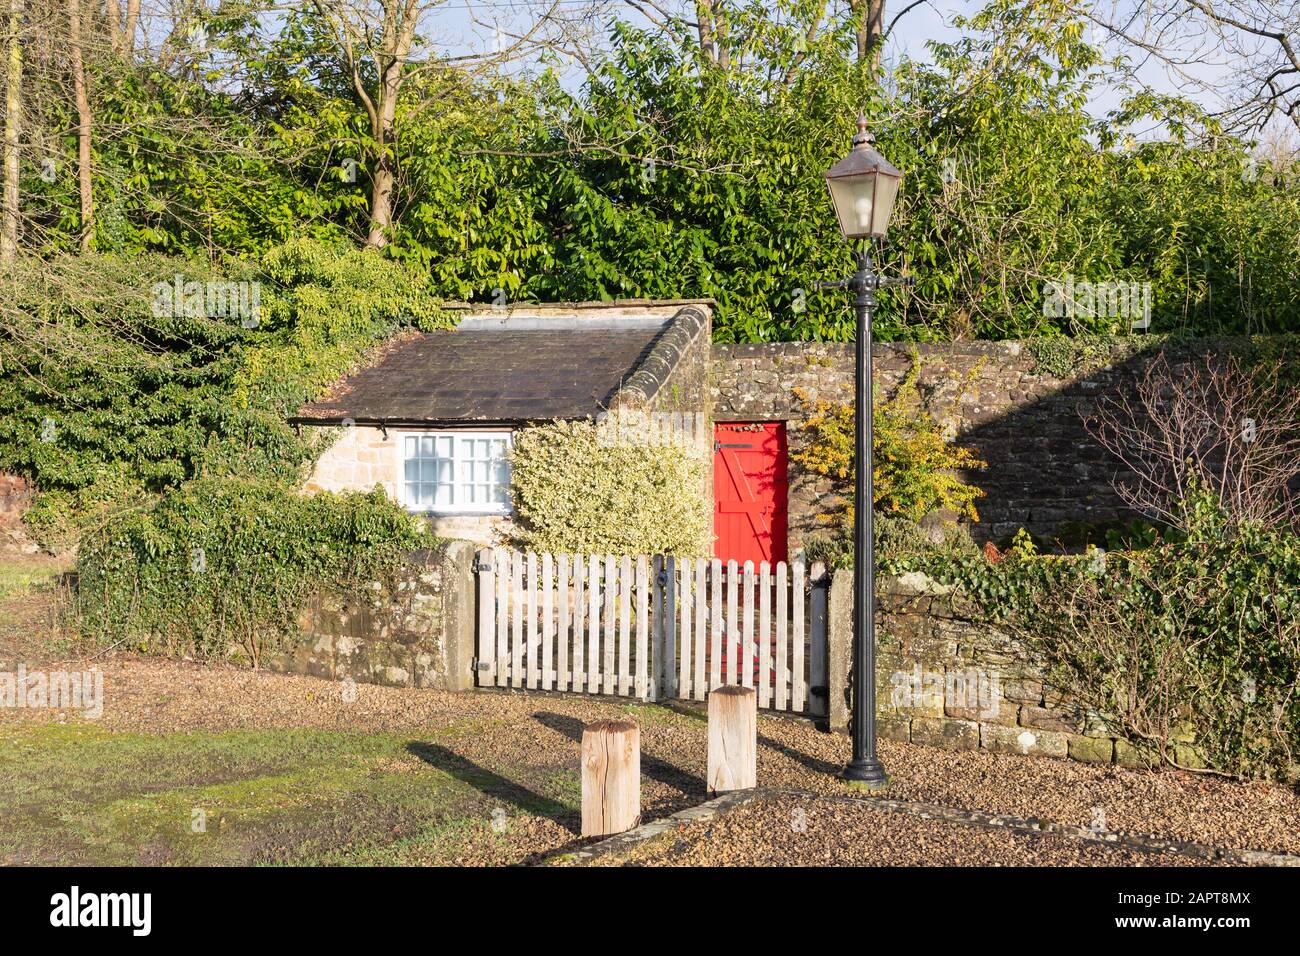 Cromford, Derbyshire, UK: Small, stone outhouse stands in a garden behind white gates and a stone wall. A lantern style streetlamp stands in front. Stock Photo